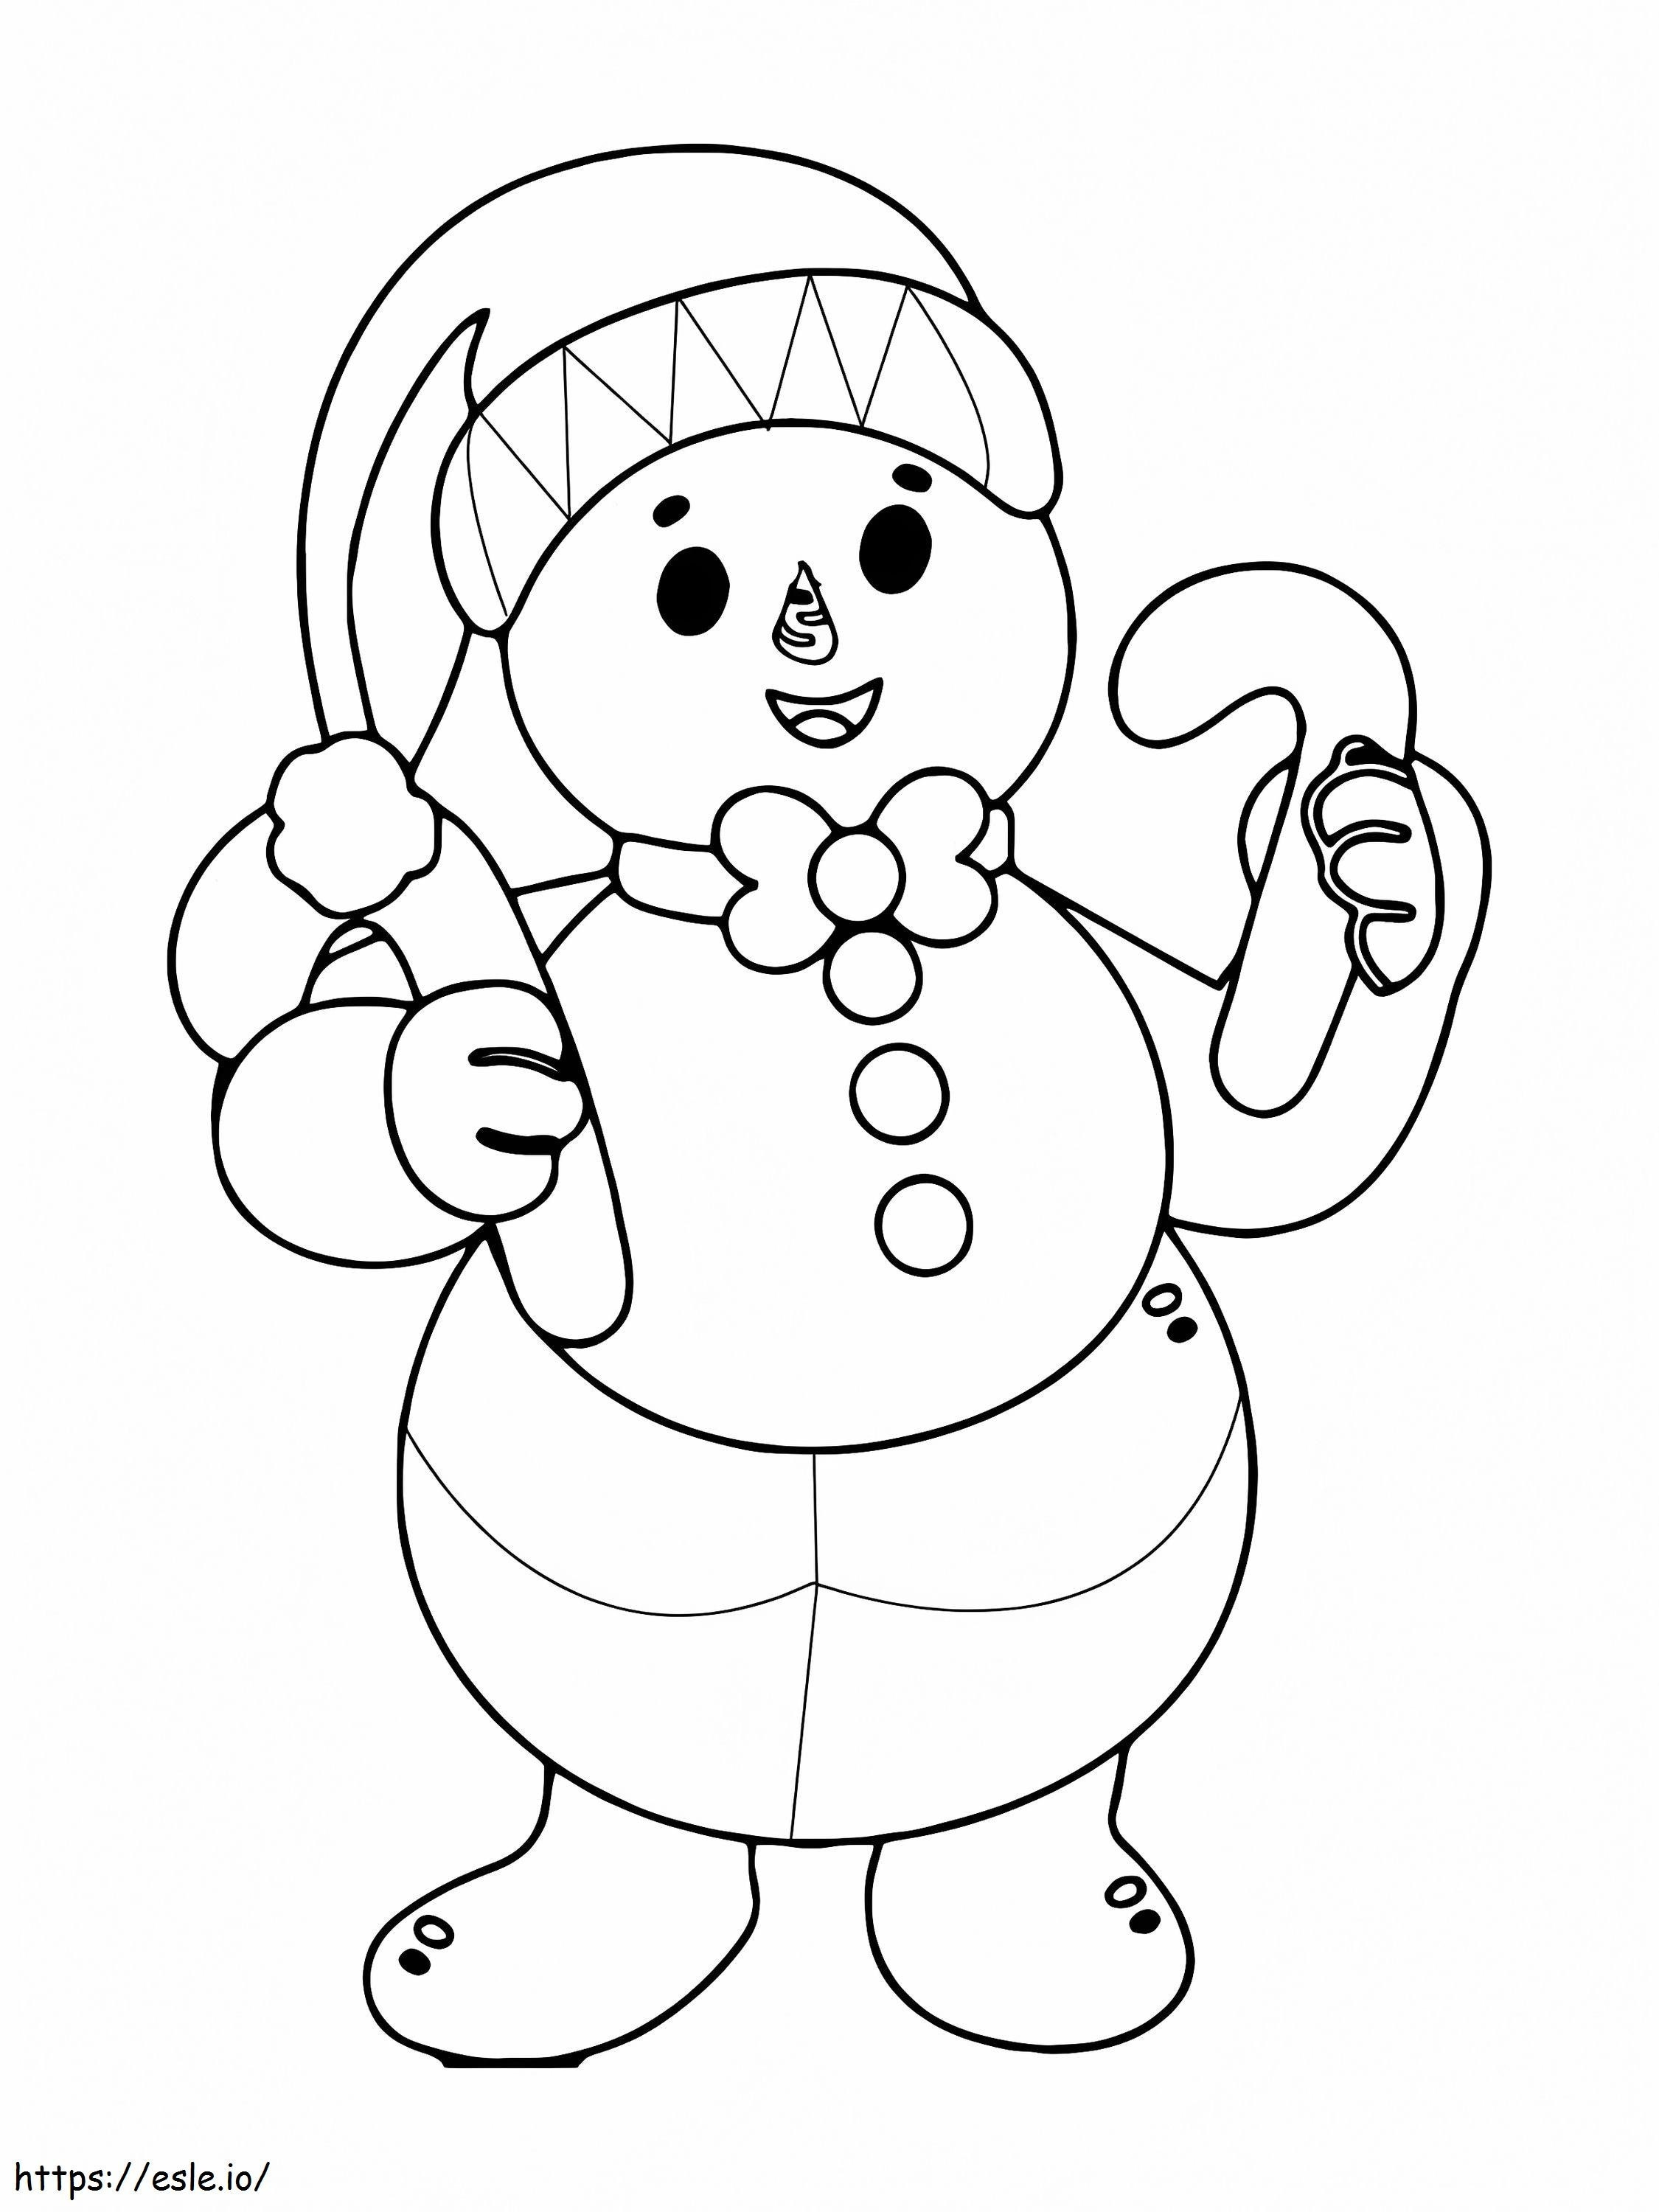 Snowman Holding Candy Canes coloring page